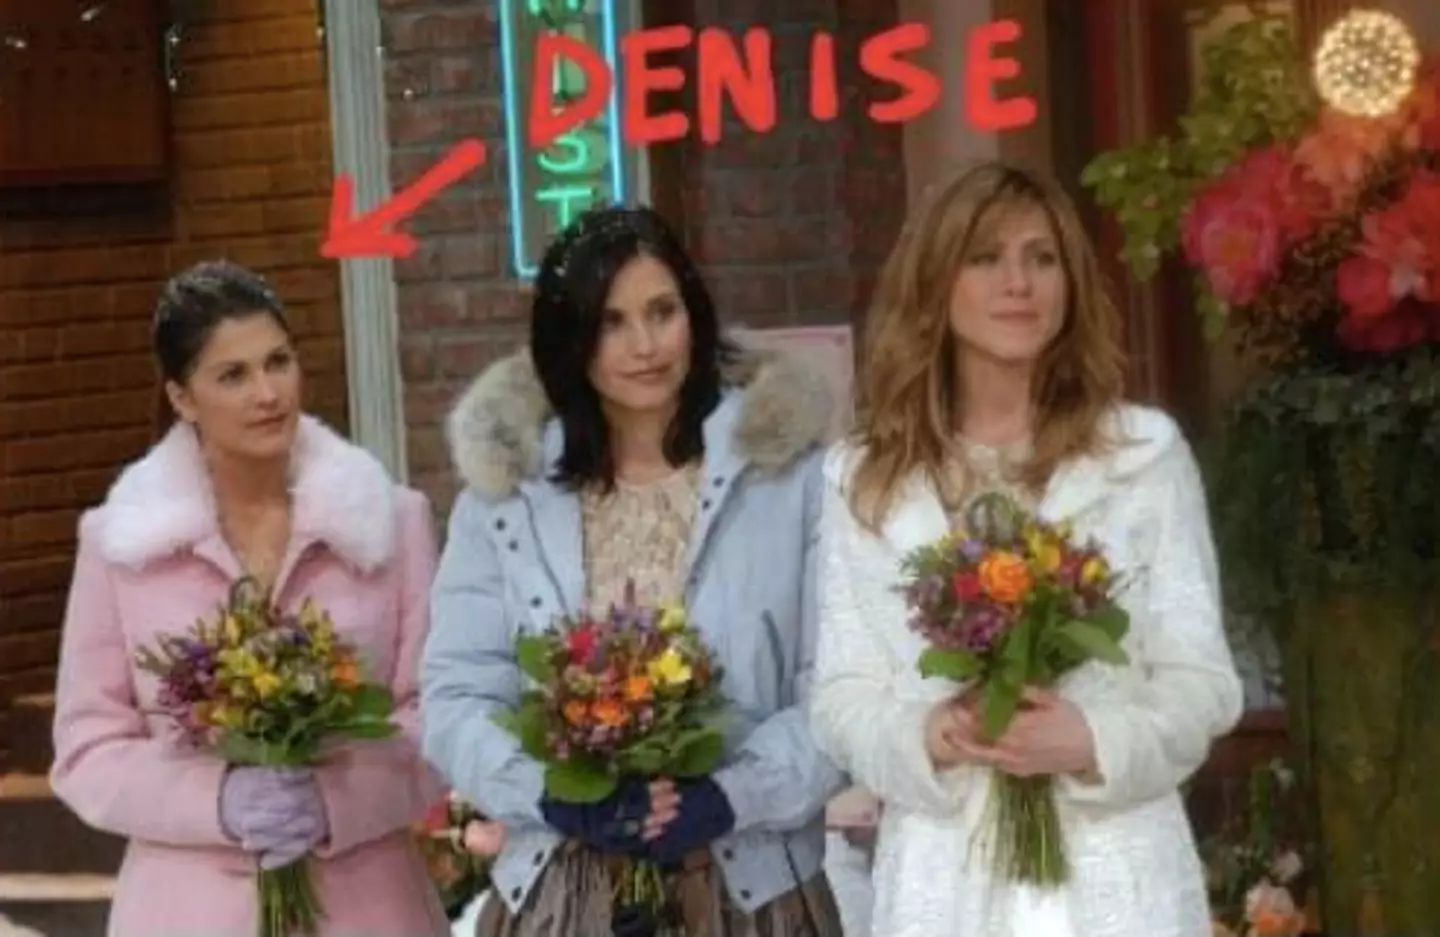 Fans think this member of the bridal party is Denise (